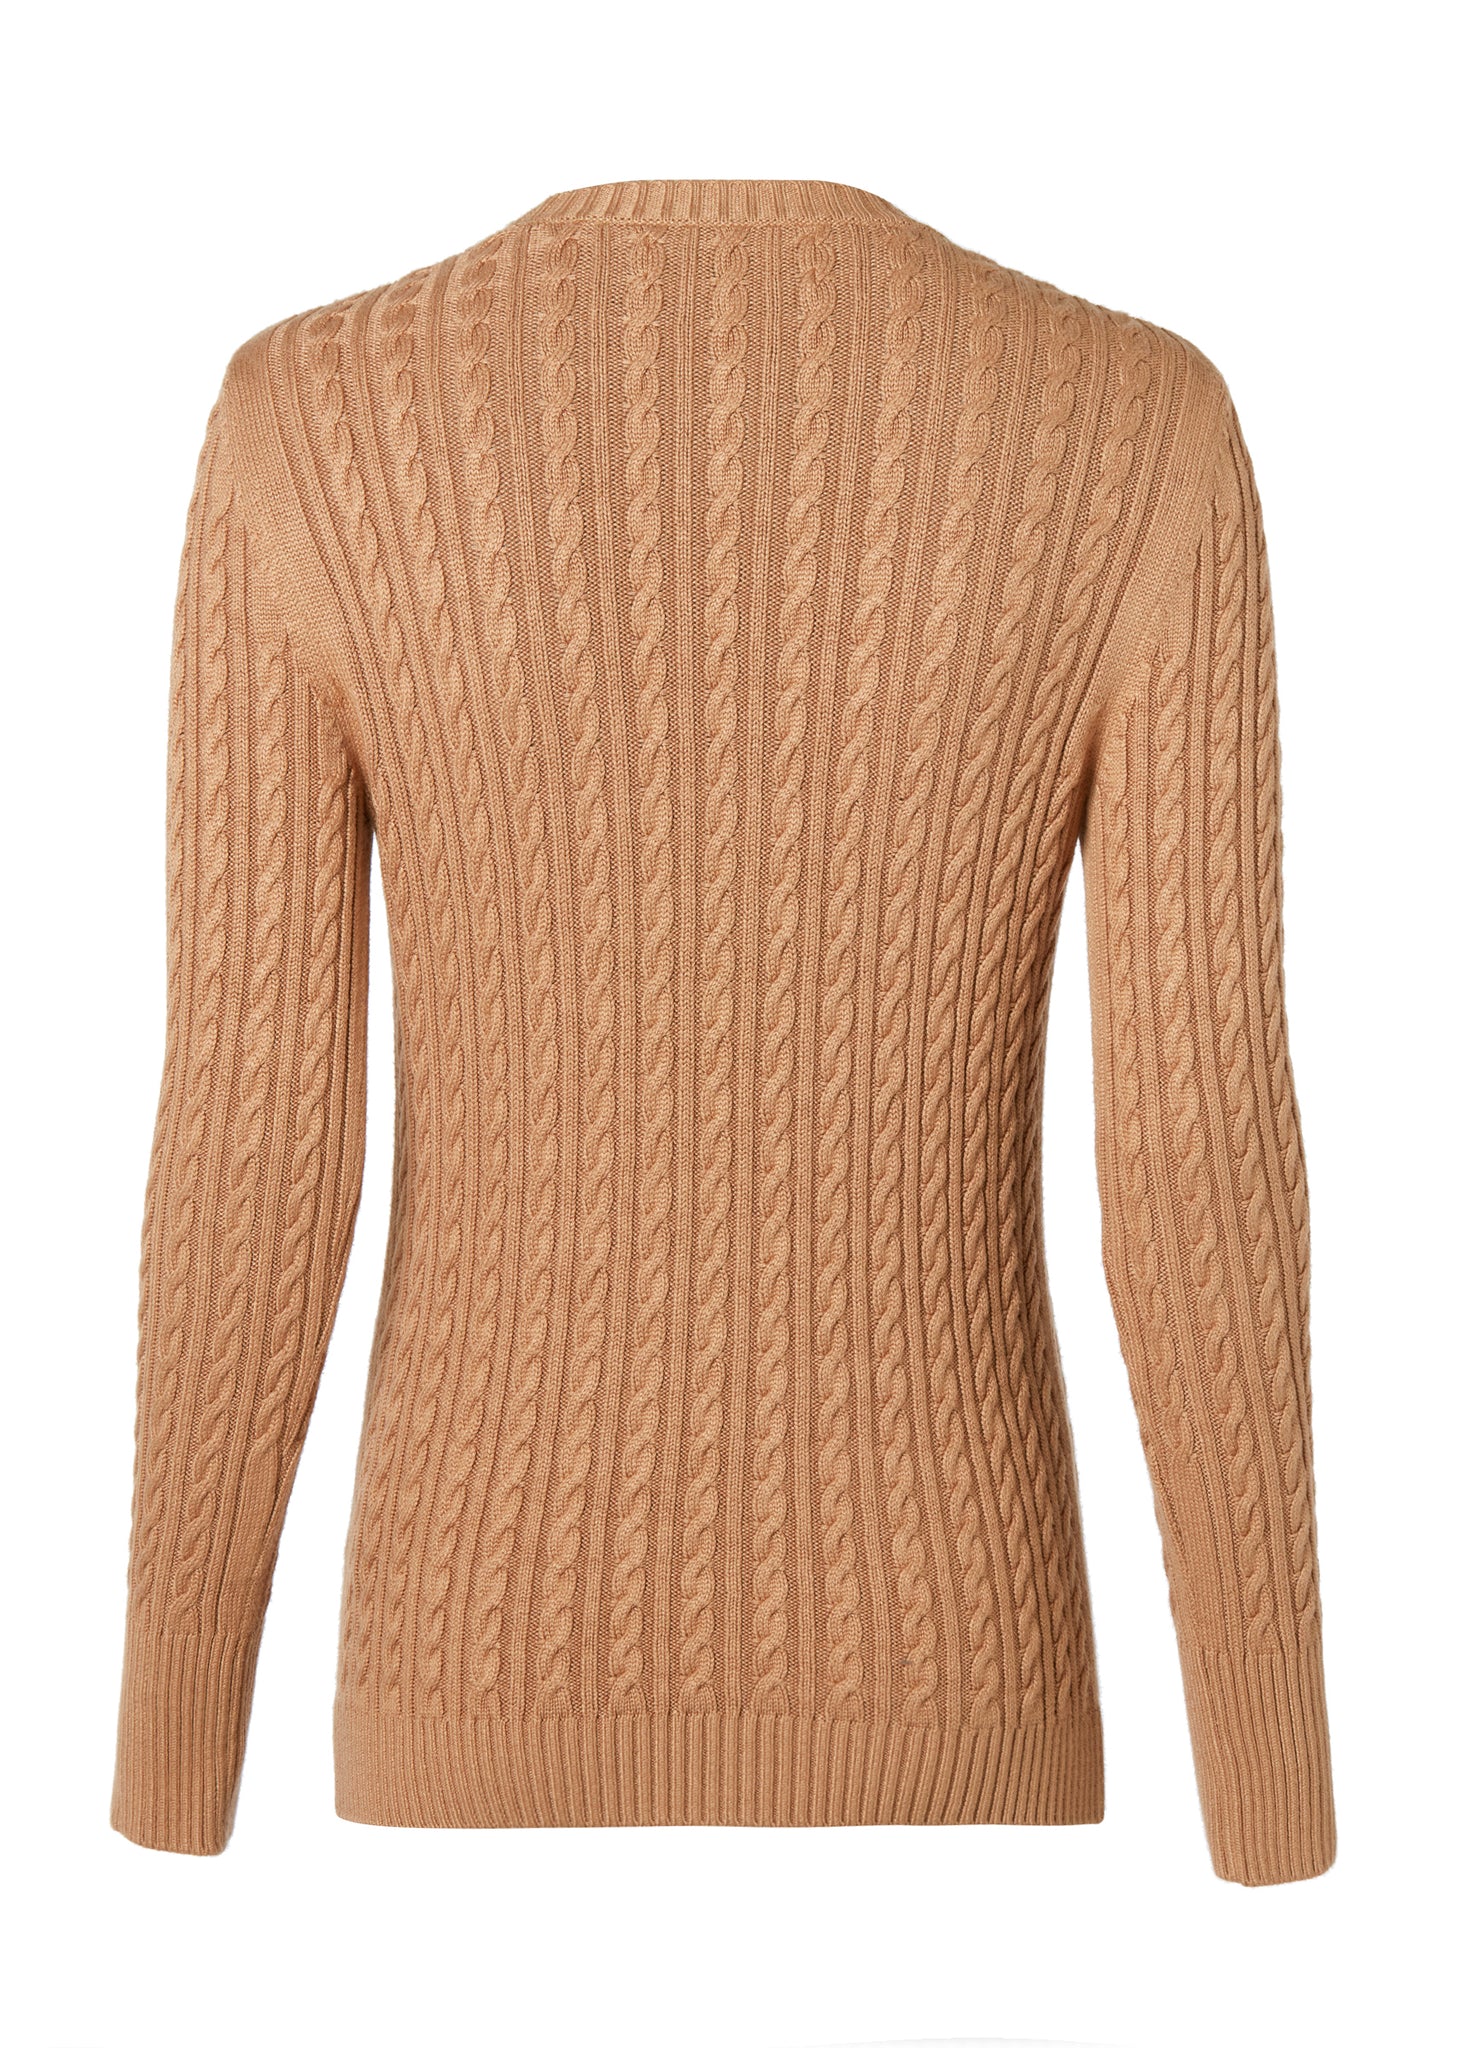 back of womens cable knit jumper in dark camel with ribbed crew neck cuffs and hem